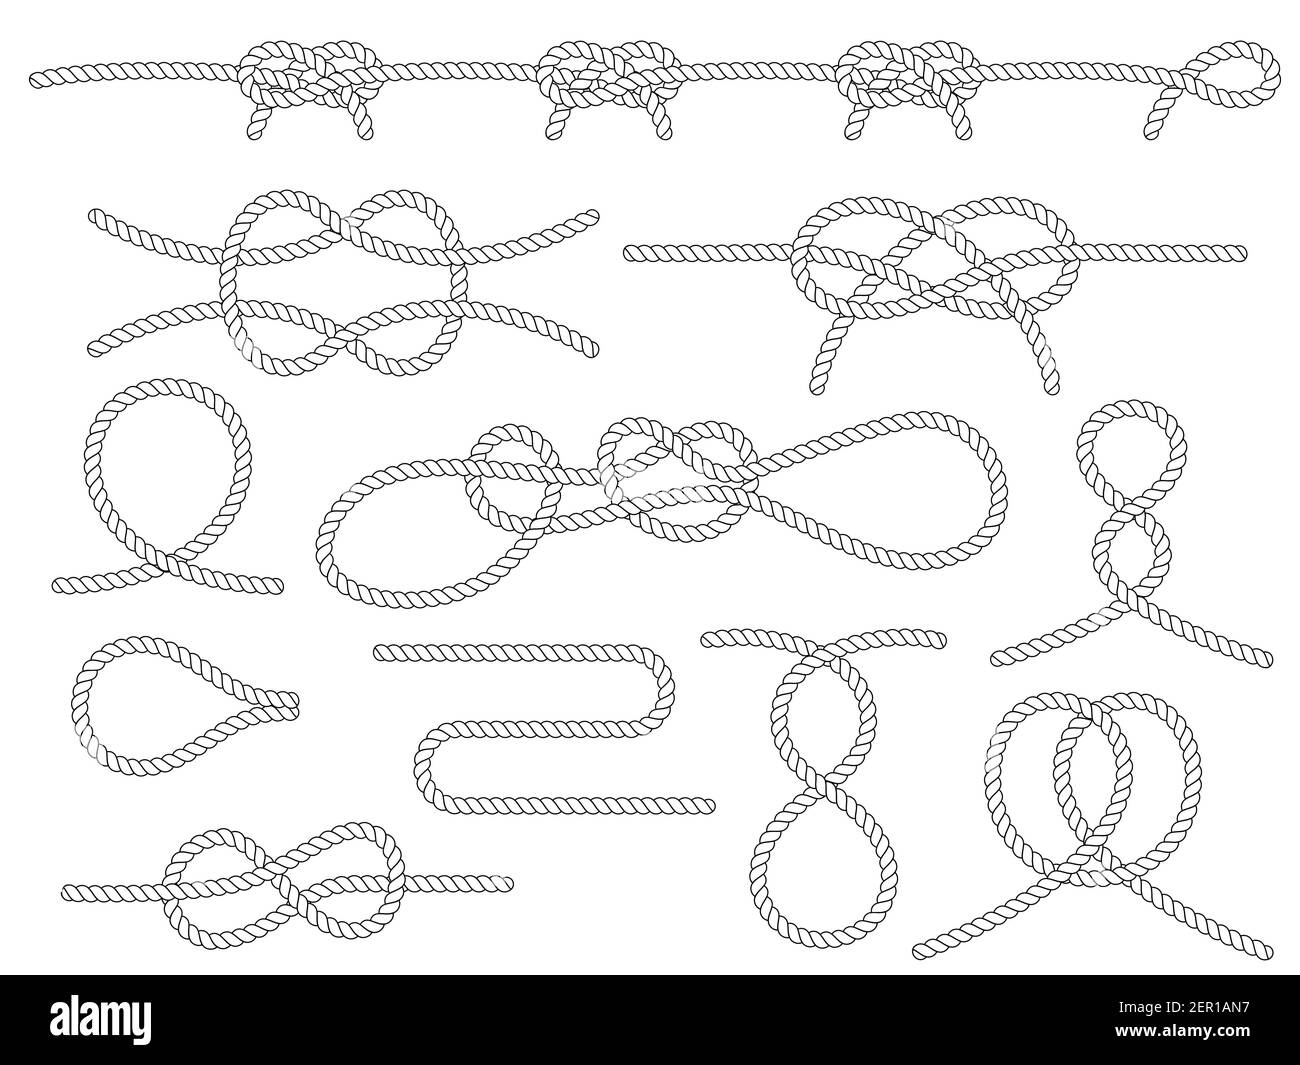 Set of nautical rope knots. Marine rope knot Stock Vector Image